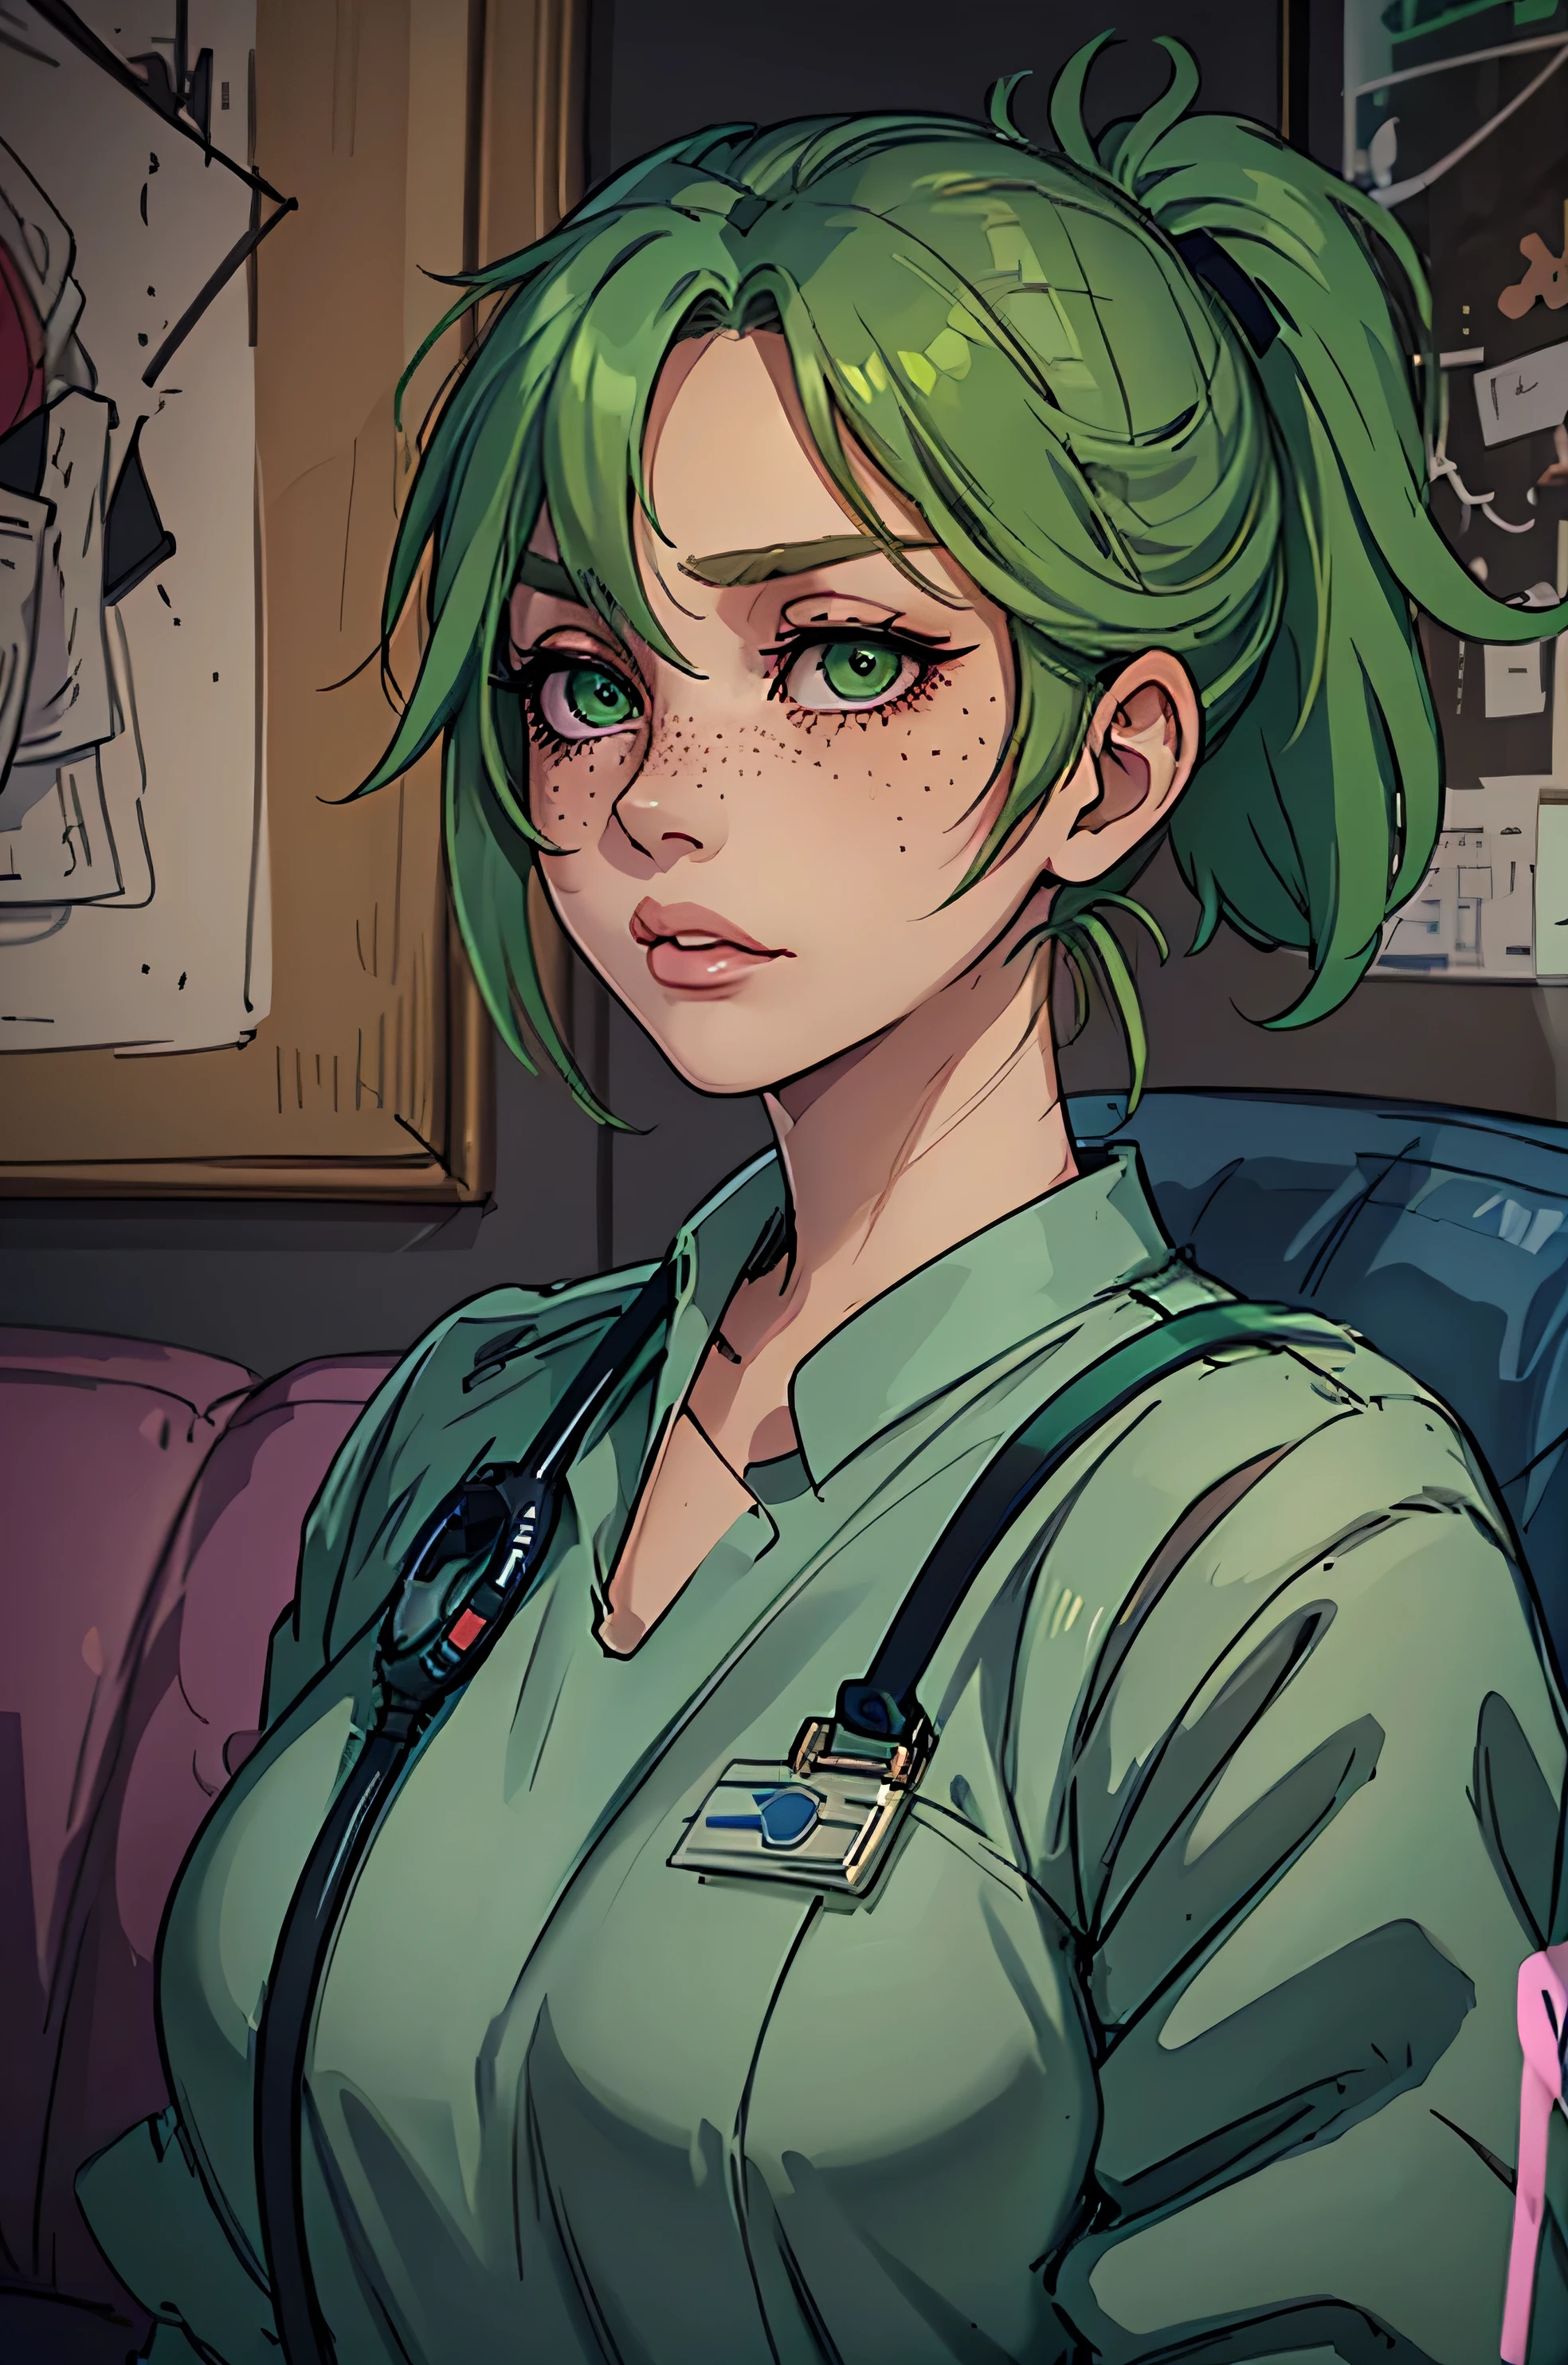 Masterpiece, best quality, centered in frame, portrait, female, tan skin, stressed expression, busty, exhaling smoke, eye bags, emt gear, stethoscope, nervous, pink full lips, messy ponytail, bright green hair, couch landscape, green eyes, paramedic uniform, freckles, beautiful